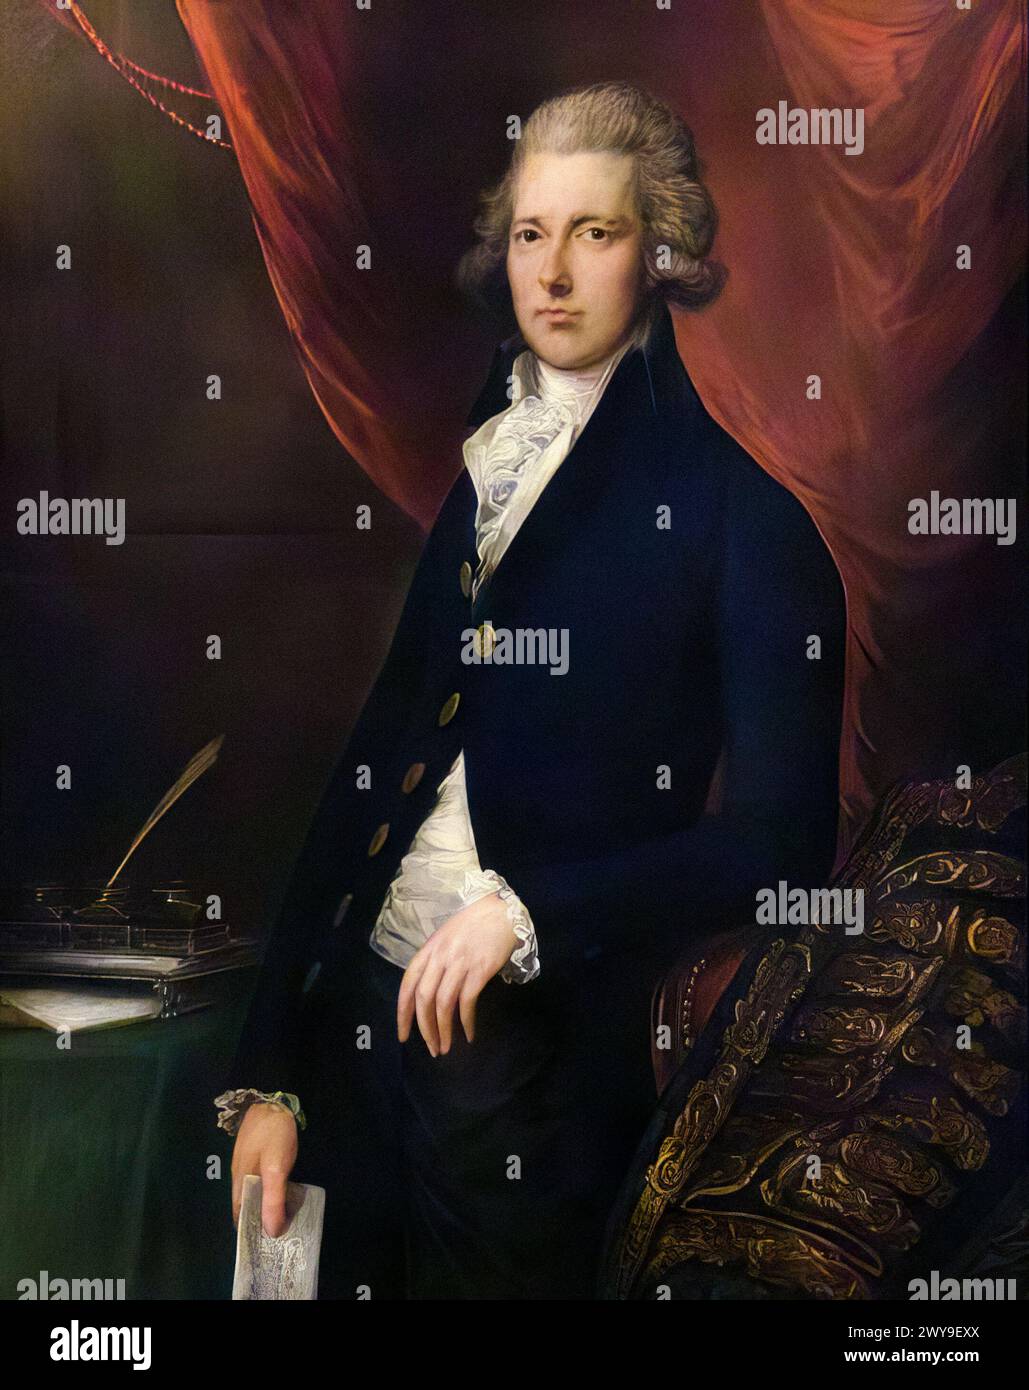 William Pitt the Younger (1759-1806), Prime Minister of Great Britain 1783-1800, Prime Minister of the United Kingdom January-March 1801 and 1804-1806, portrait painting in oil on canvas by Gainsborough Dupont and workshop, circa 1787 Stock Photo